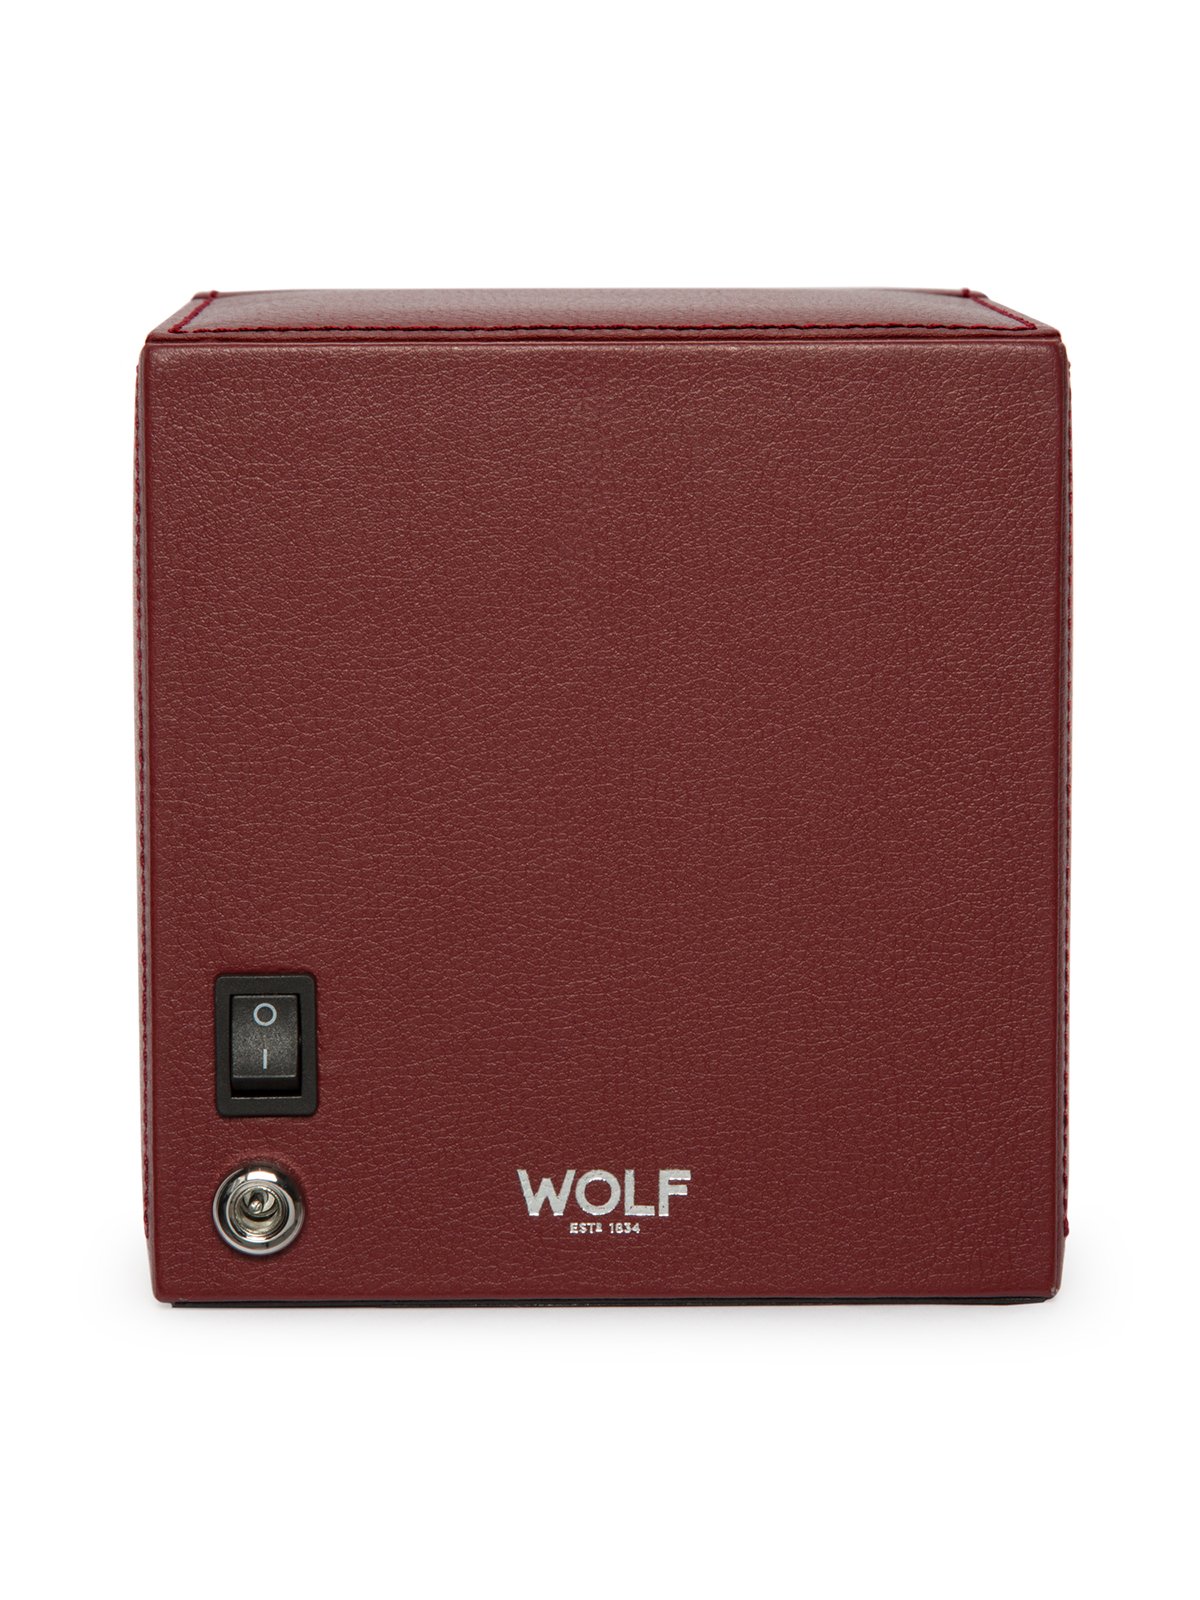 Wolf Cub Single Watch Winder with Cover - Bordeaux Pebble